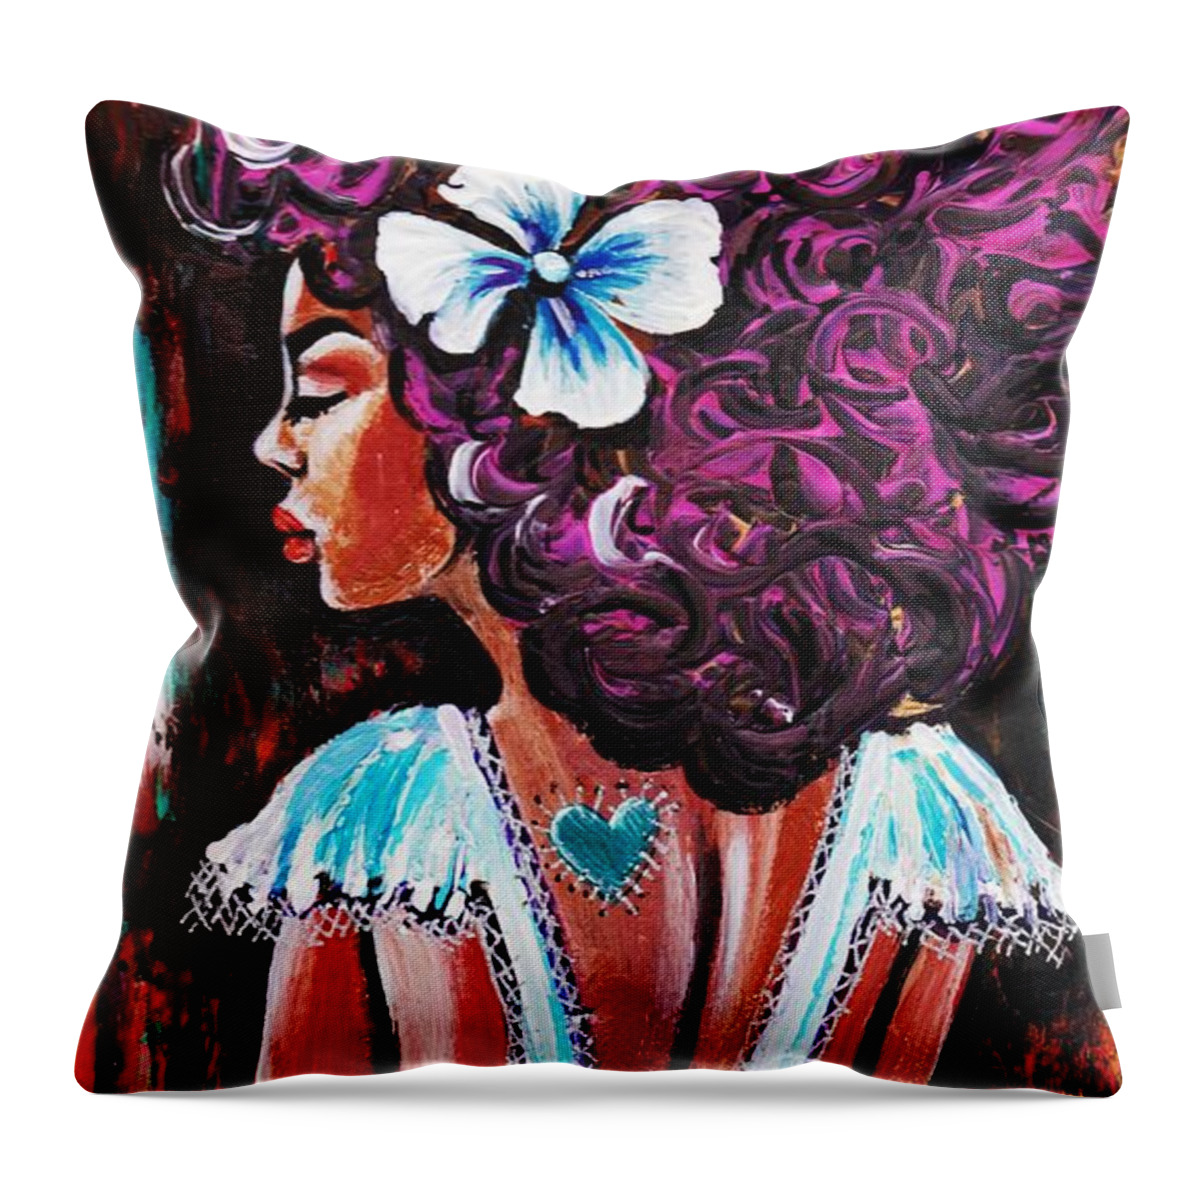 Artbyria Throw Pillow featuring the photograph She Loved The Most by Artist RiA